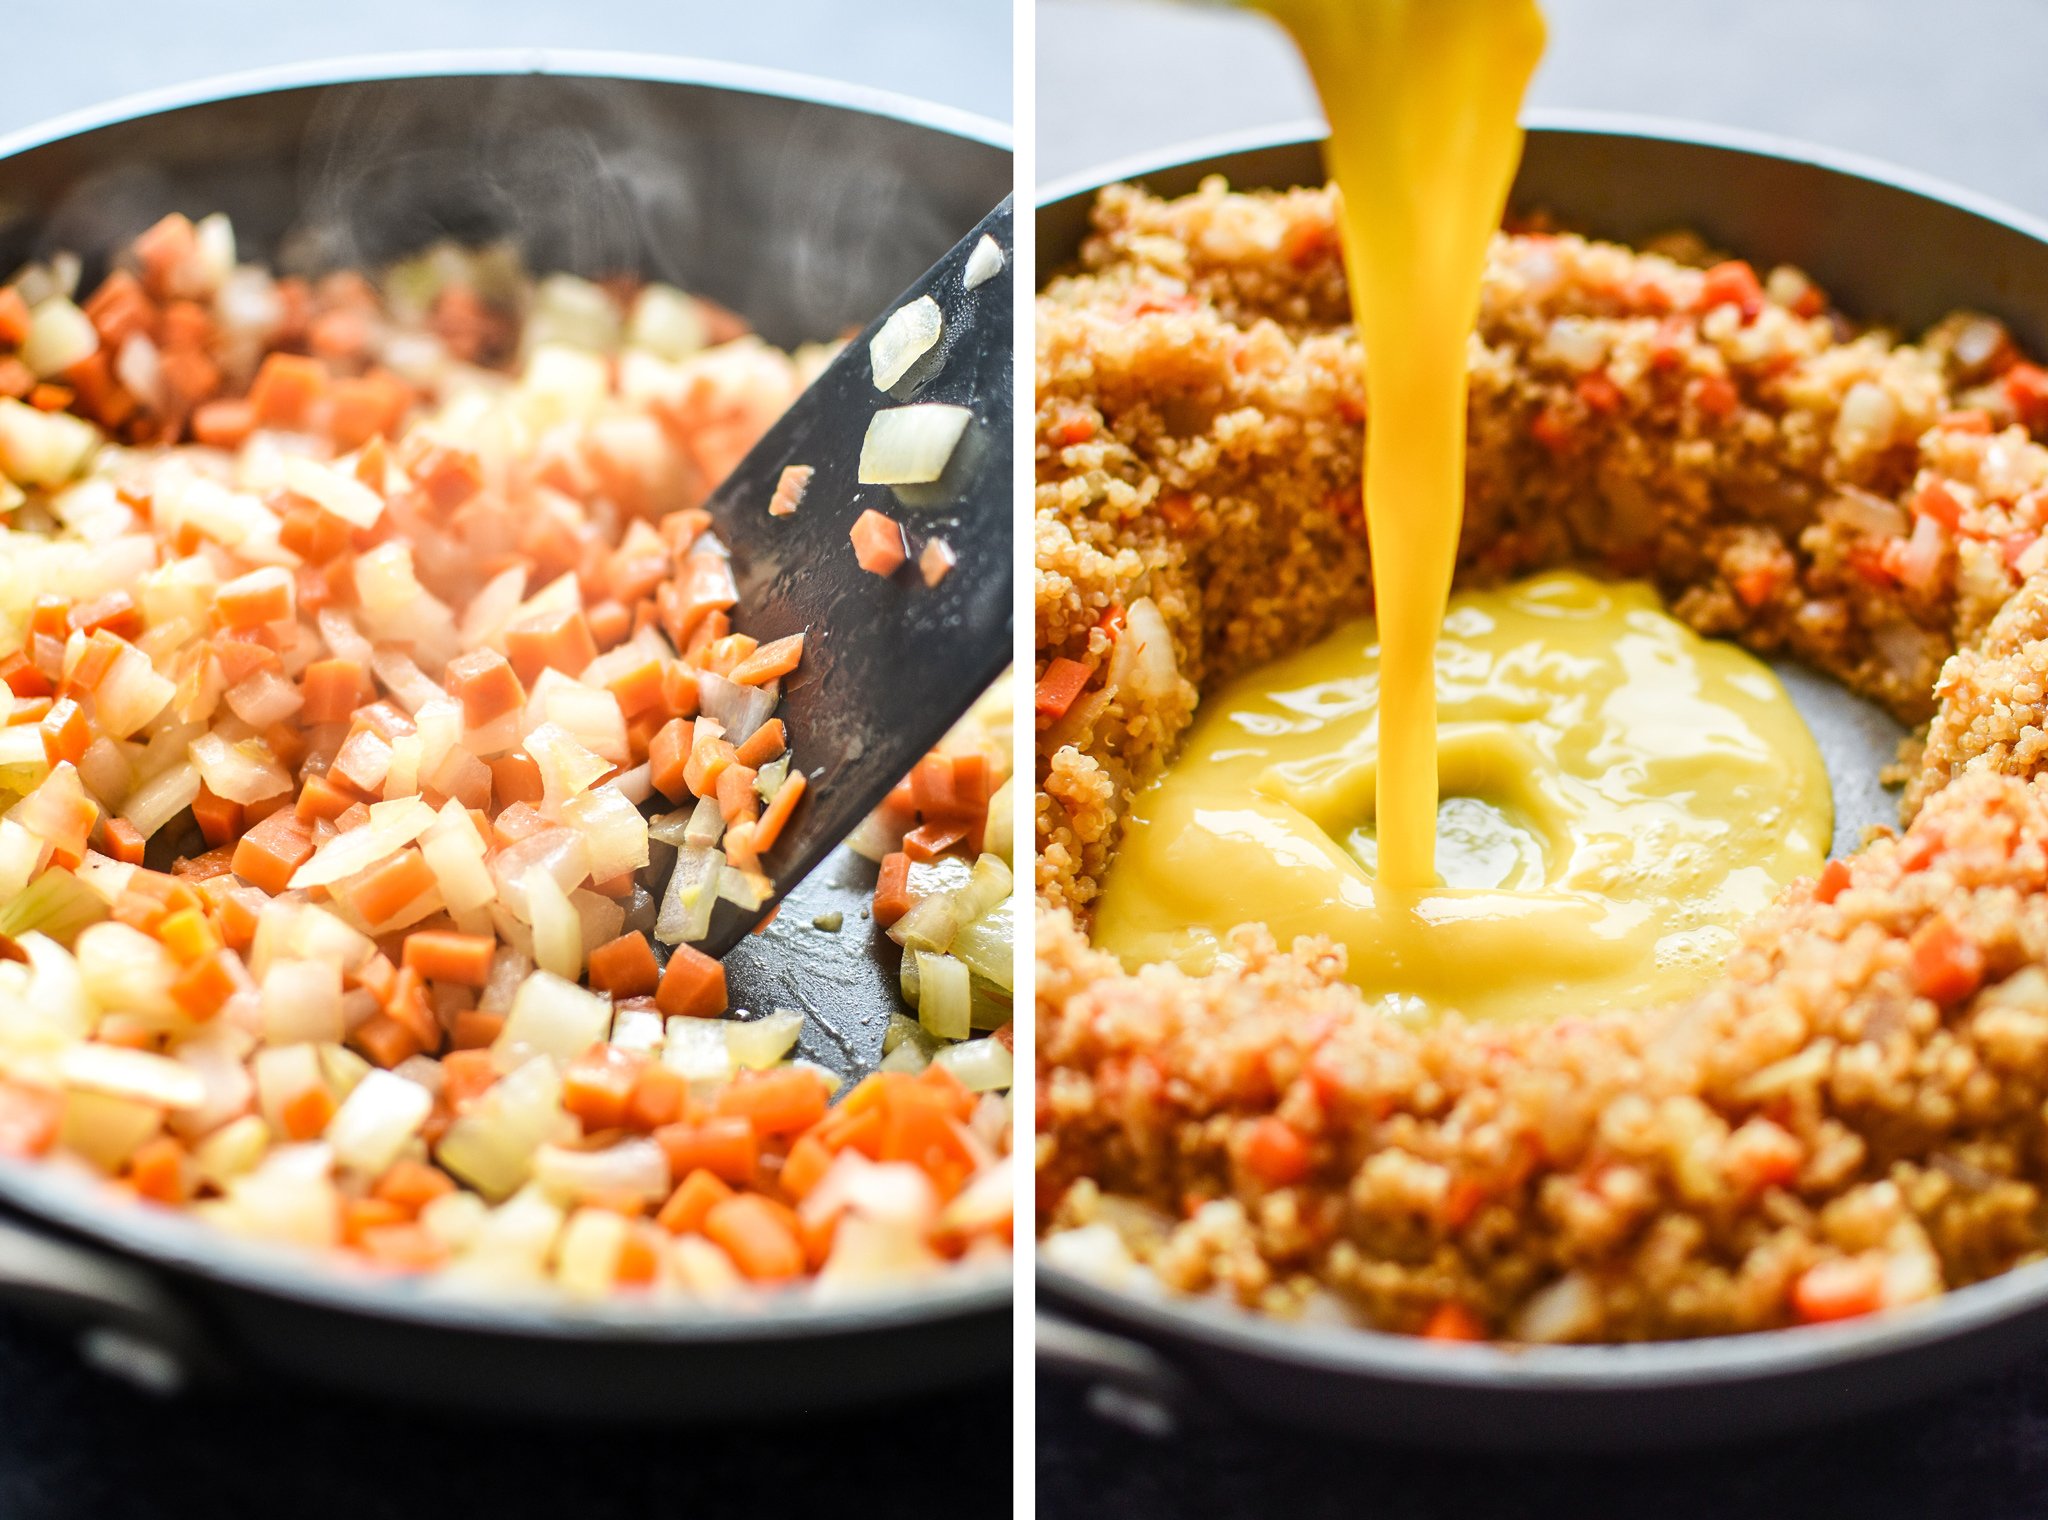 Left: Cooking carrots and onions in a non stick pan. Right: Adding eggs into the a well in the center of the quinoa and vegetables.